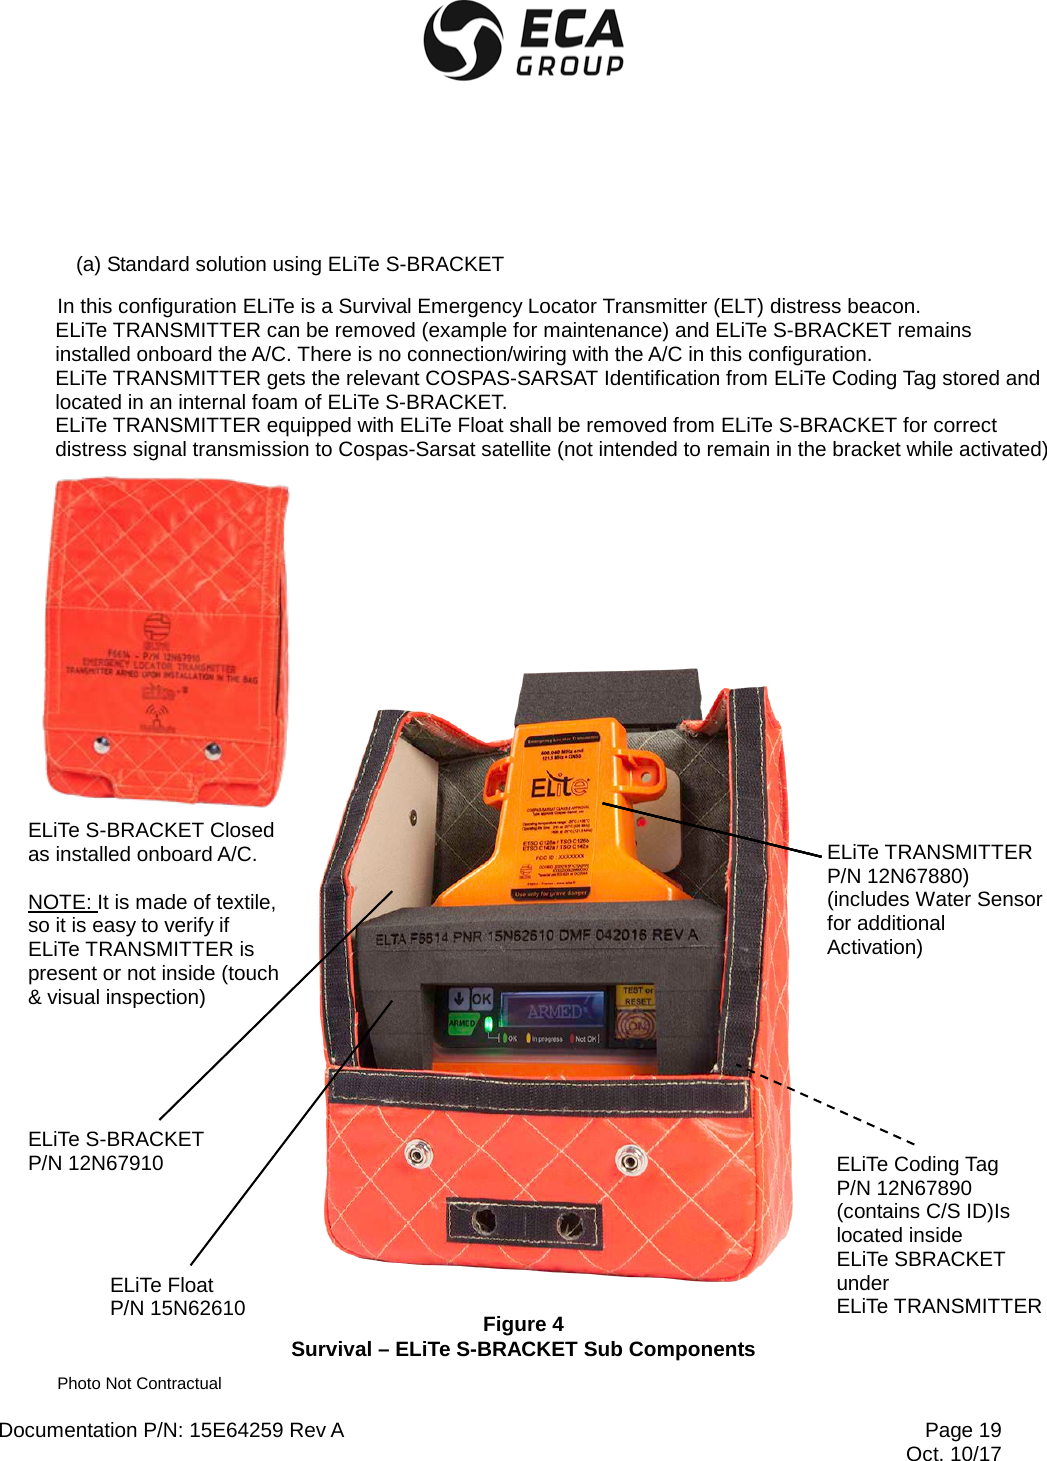  Documentation P/N: 15E64259 Rev A Page 19    Oct. 10/17  (a) Standard solution using ELiTe S-BRACKET In this configuration ELiTe is a Survival Emergency Locator Transmitter (ELT) distress beacon. ELiTe TRANSMITTER can be removed (example for maintenance) and ELiTe S-BRACKET remains installed onboard the A/C. There is no connection/wiring with the A/C in this configuration. ELiTe TRANSMITTER gets the relevant COSPAS-SARSAT Identification from ELiTe Coding Tag stored and located in an internal foam of ELiTe S-BRACKET. ELiTe TRANSMITTER equipped with ELiTe Float shall be removed from ELiTe S-BRACKET for correct distress signal transmission to Cospas-Sarsat satellite (not intended to remain in the bracket while activated)      Figure 4 Survival – ELiTe S-BRACKET Sub Components Photo Not Contractual ELiTe TRANSMITTER  P/N 12N67880) (includes Water Sensor for additional Activation) ELiTe Float P/N 15N62610 ELiTe S-BRACKET P/N 12N67910 ELiTe Coding Tag  P/N 12N67890 (contains C/S ID)Is located inside  ELiTe SBRACKET under  ELiTe TRANSMITTER ELiTe S-BRACKET Closed as installed onboard A/C.  NOTE: It is made of textile, so it is easy to verify if ELiTe TRANSMITTER is present or not inside (touch &amp; visual inspection) 